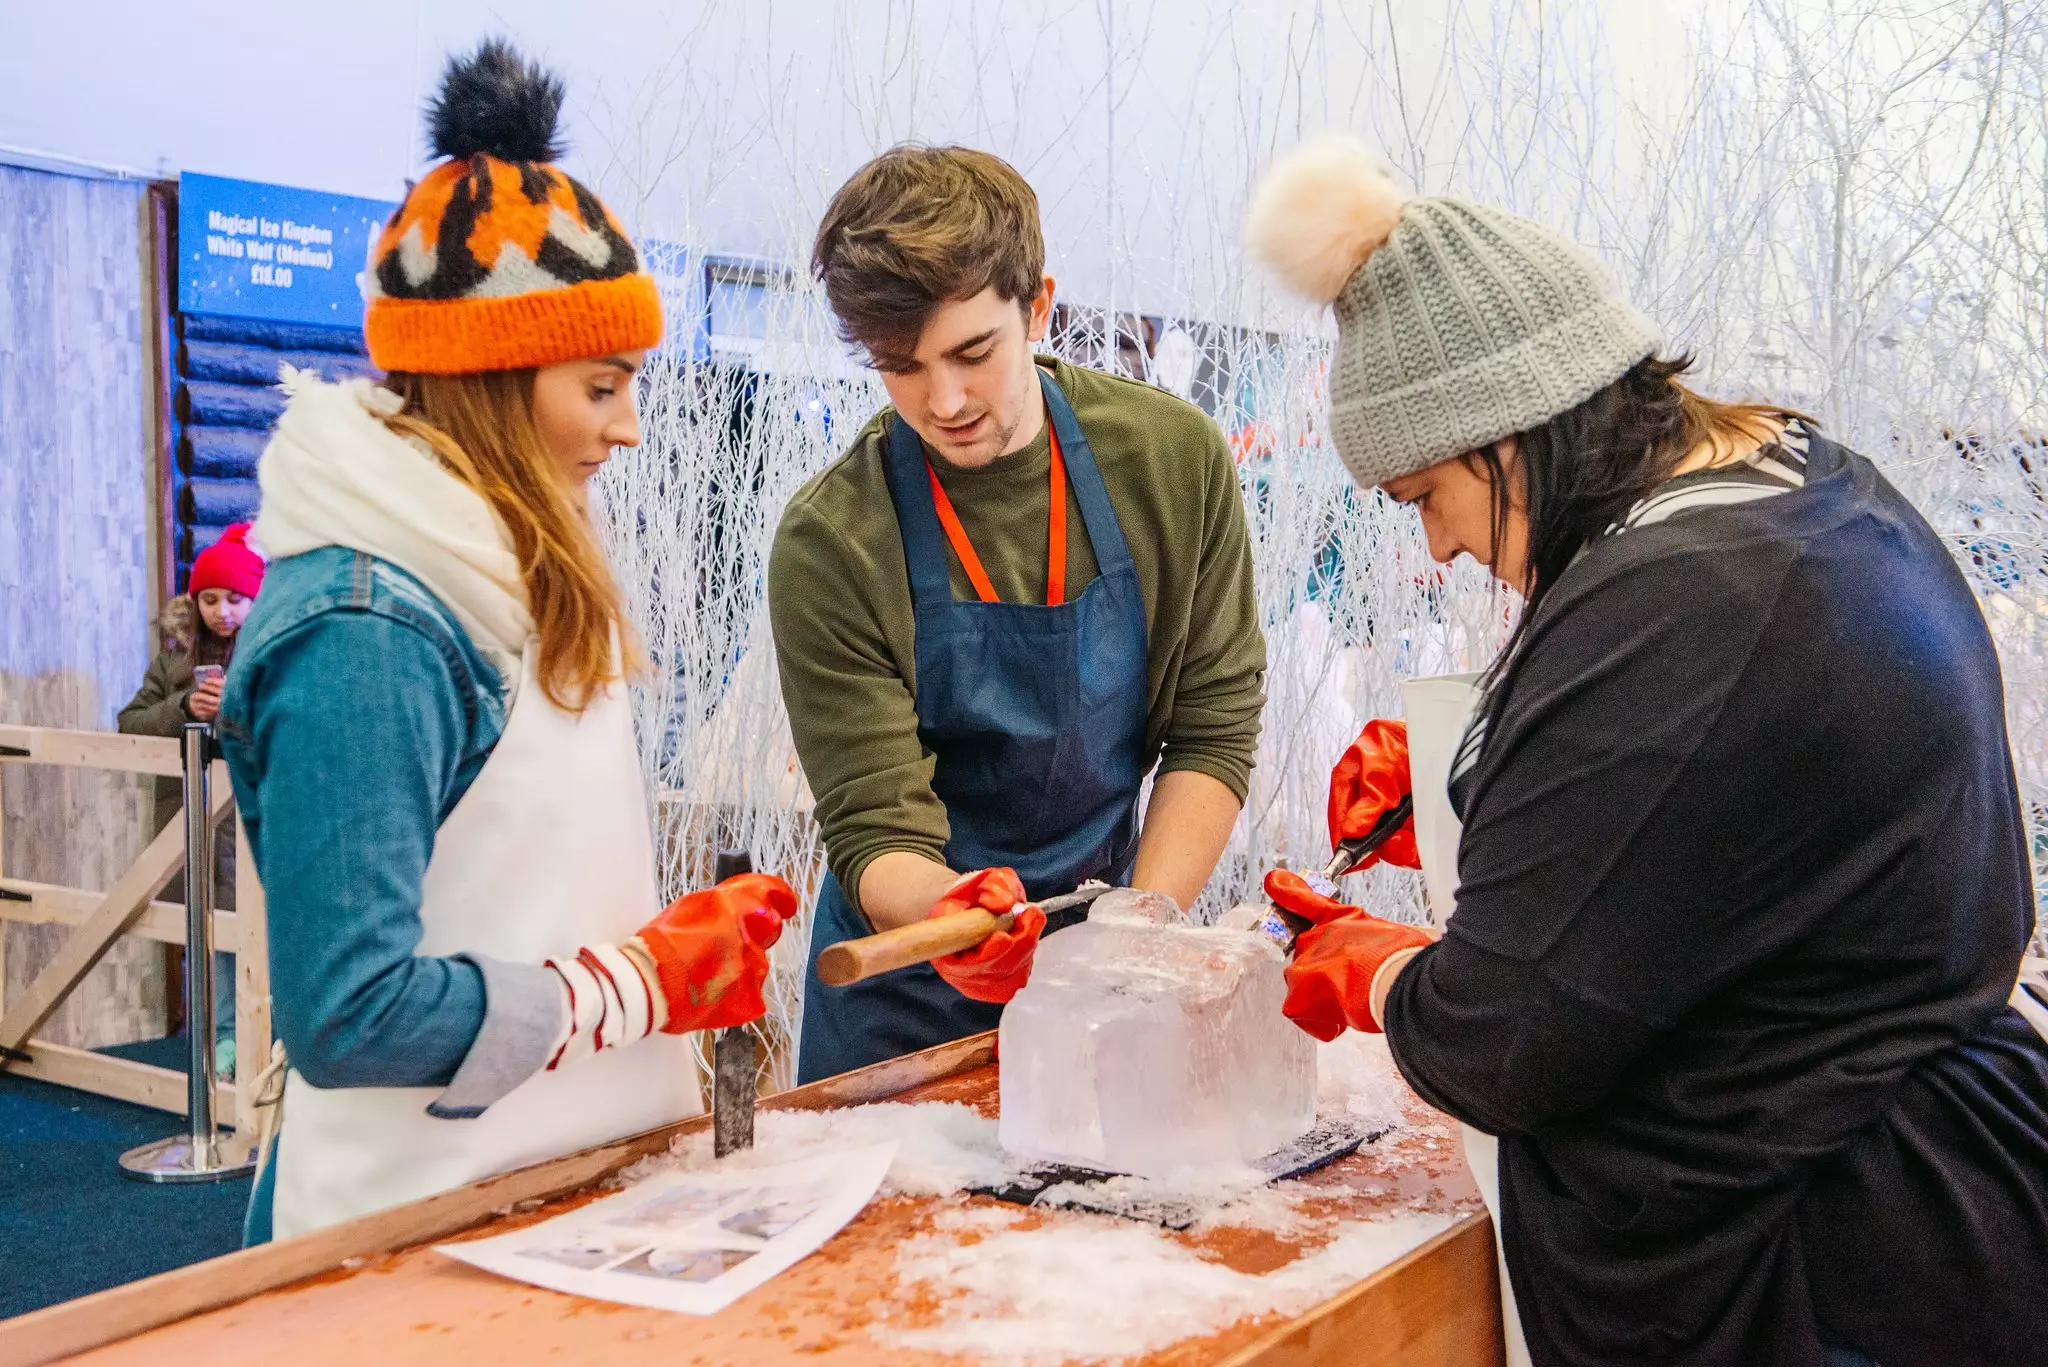 Why not try an ice-sculpting workshop? (